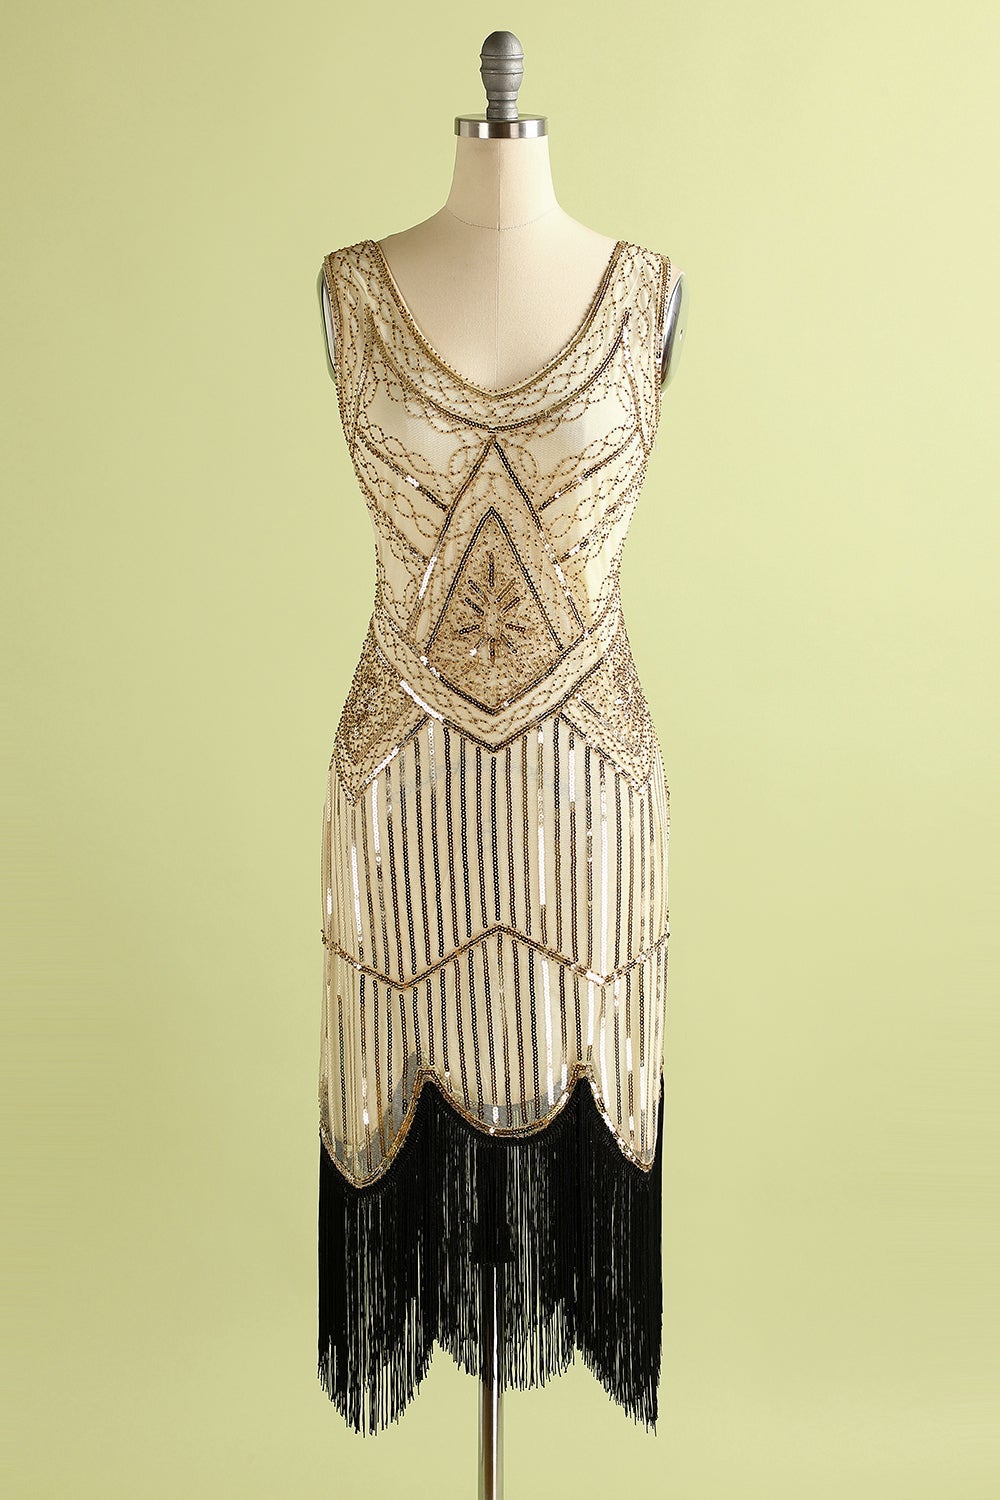 Champagne and Black Sequin Bodycon 1920s Dress